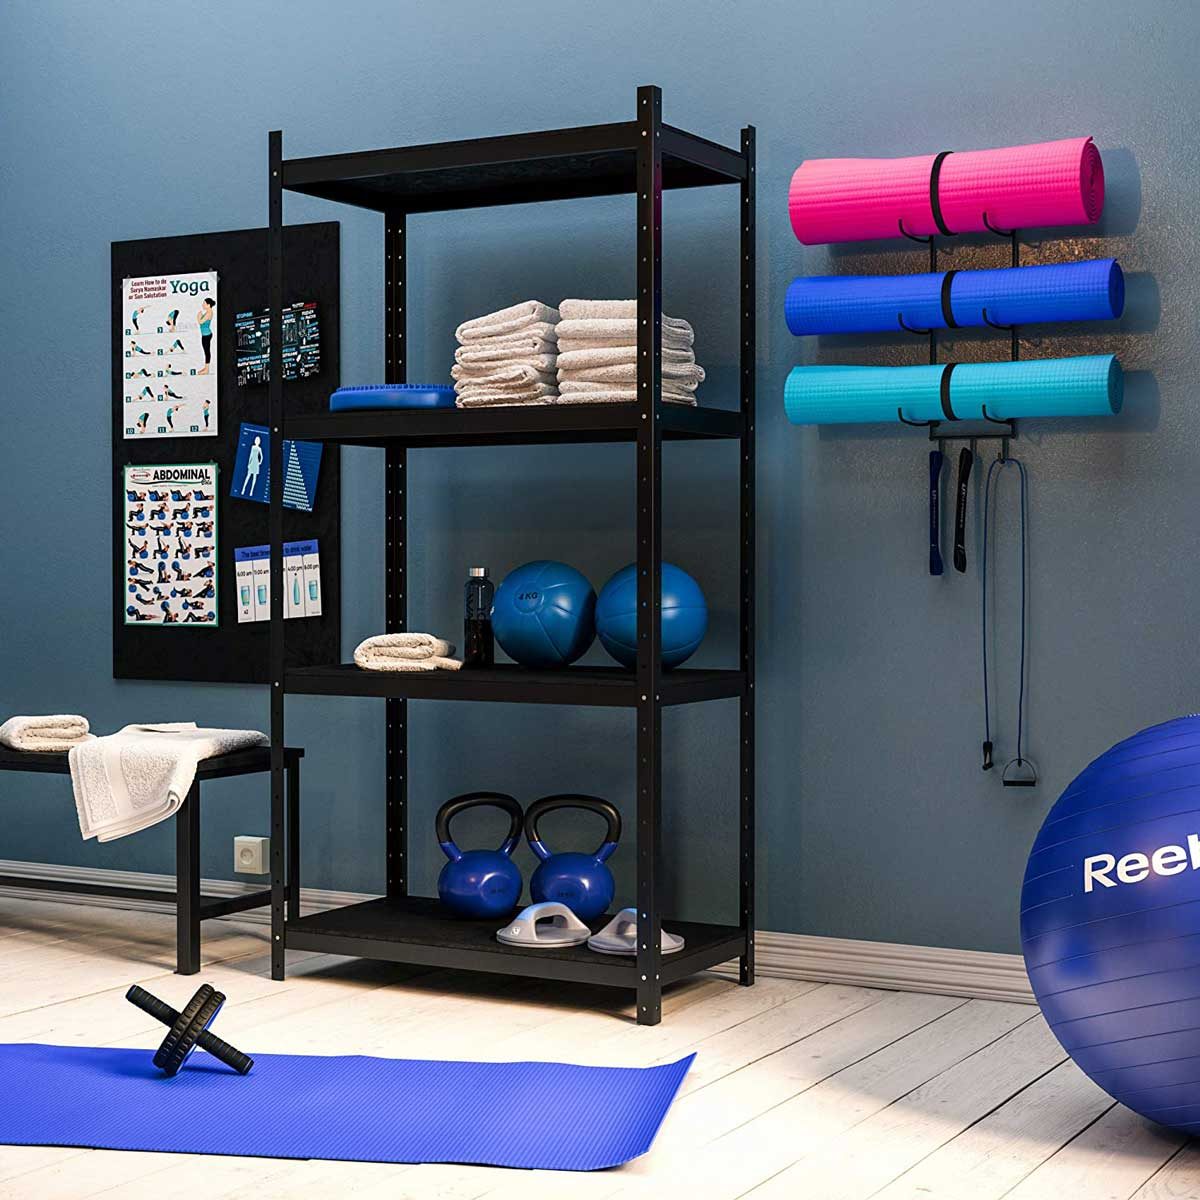 How to Organize Your Workout Gear